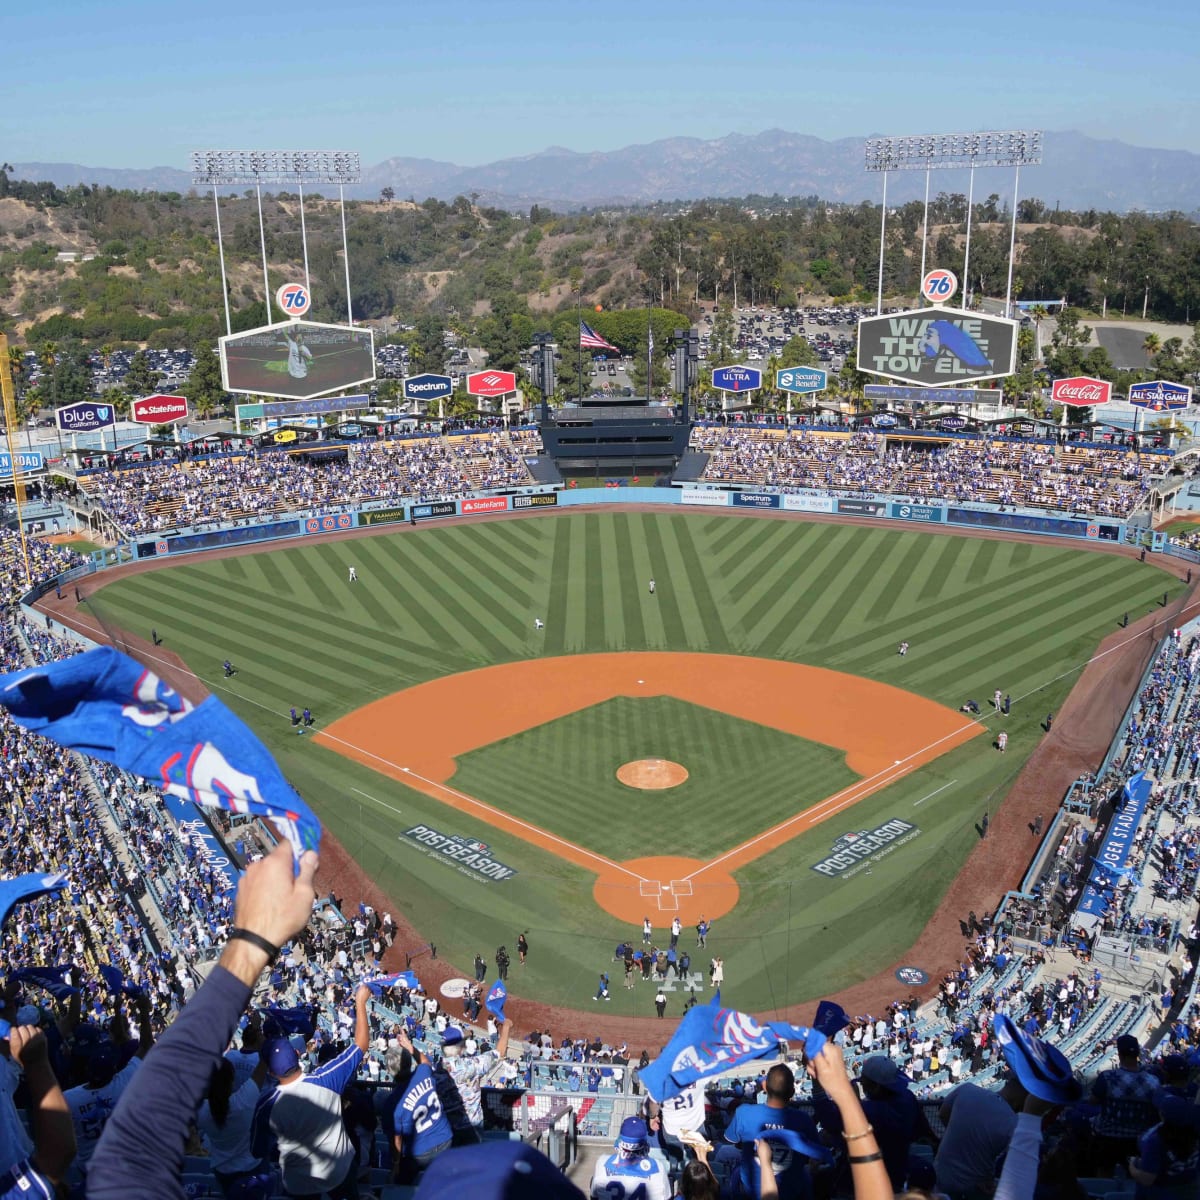 Here's what's new at Dodger Stadium